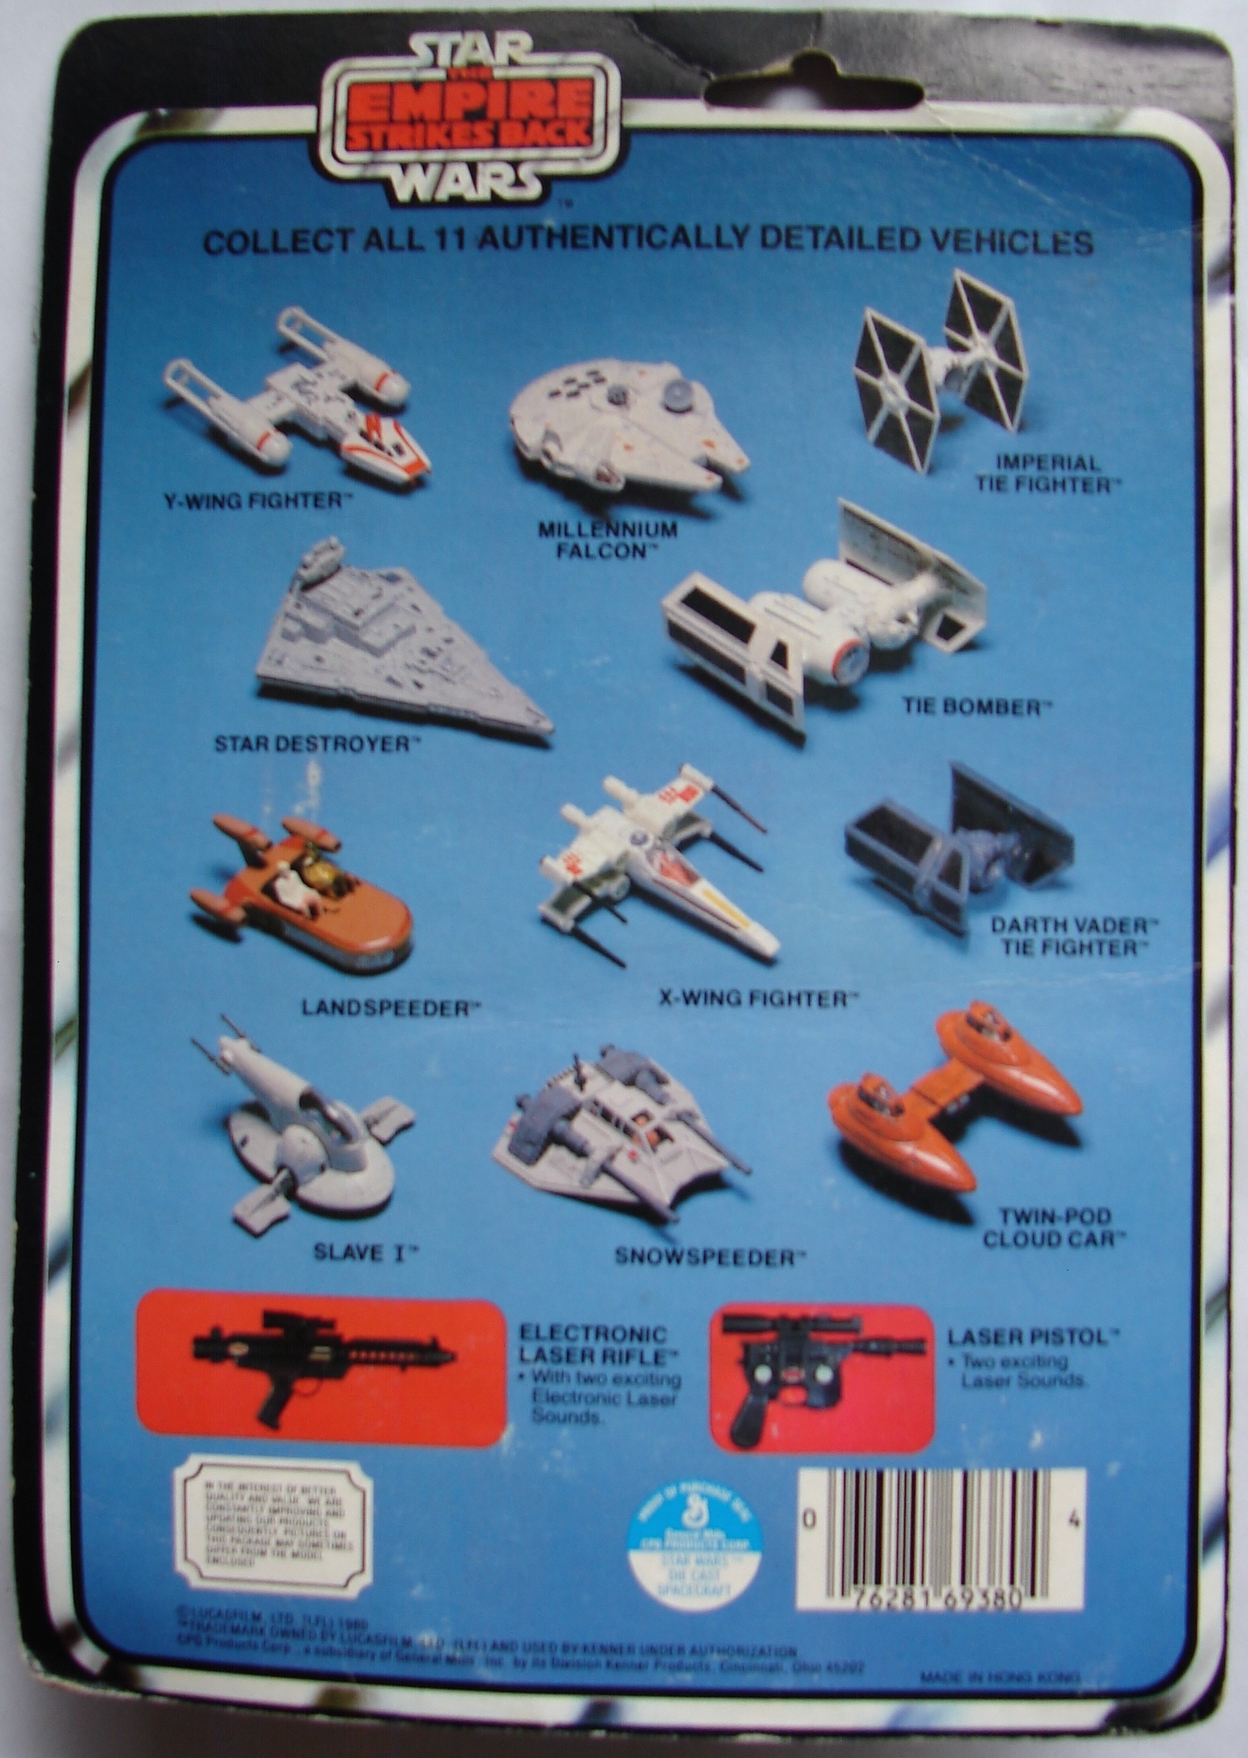 spaceship toys from the 80's